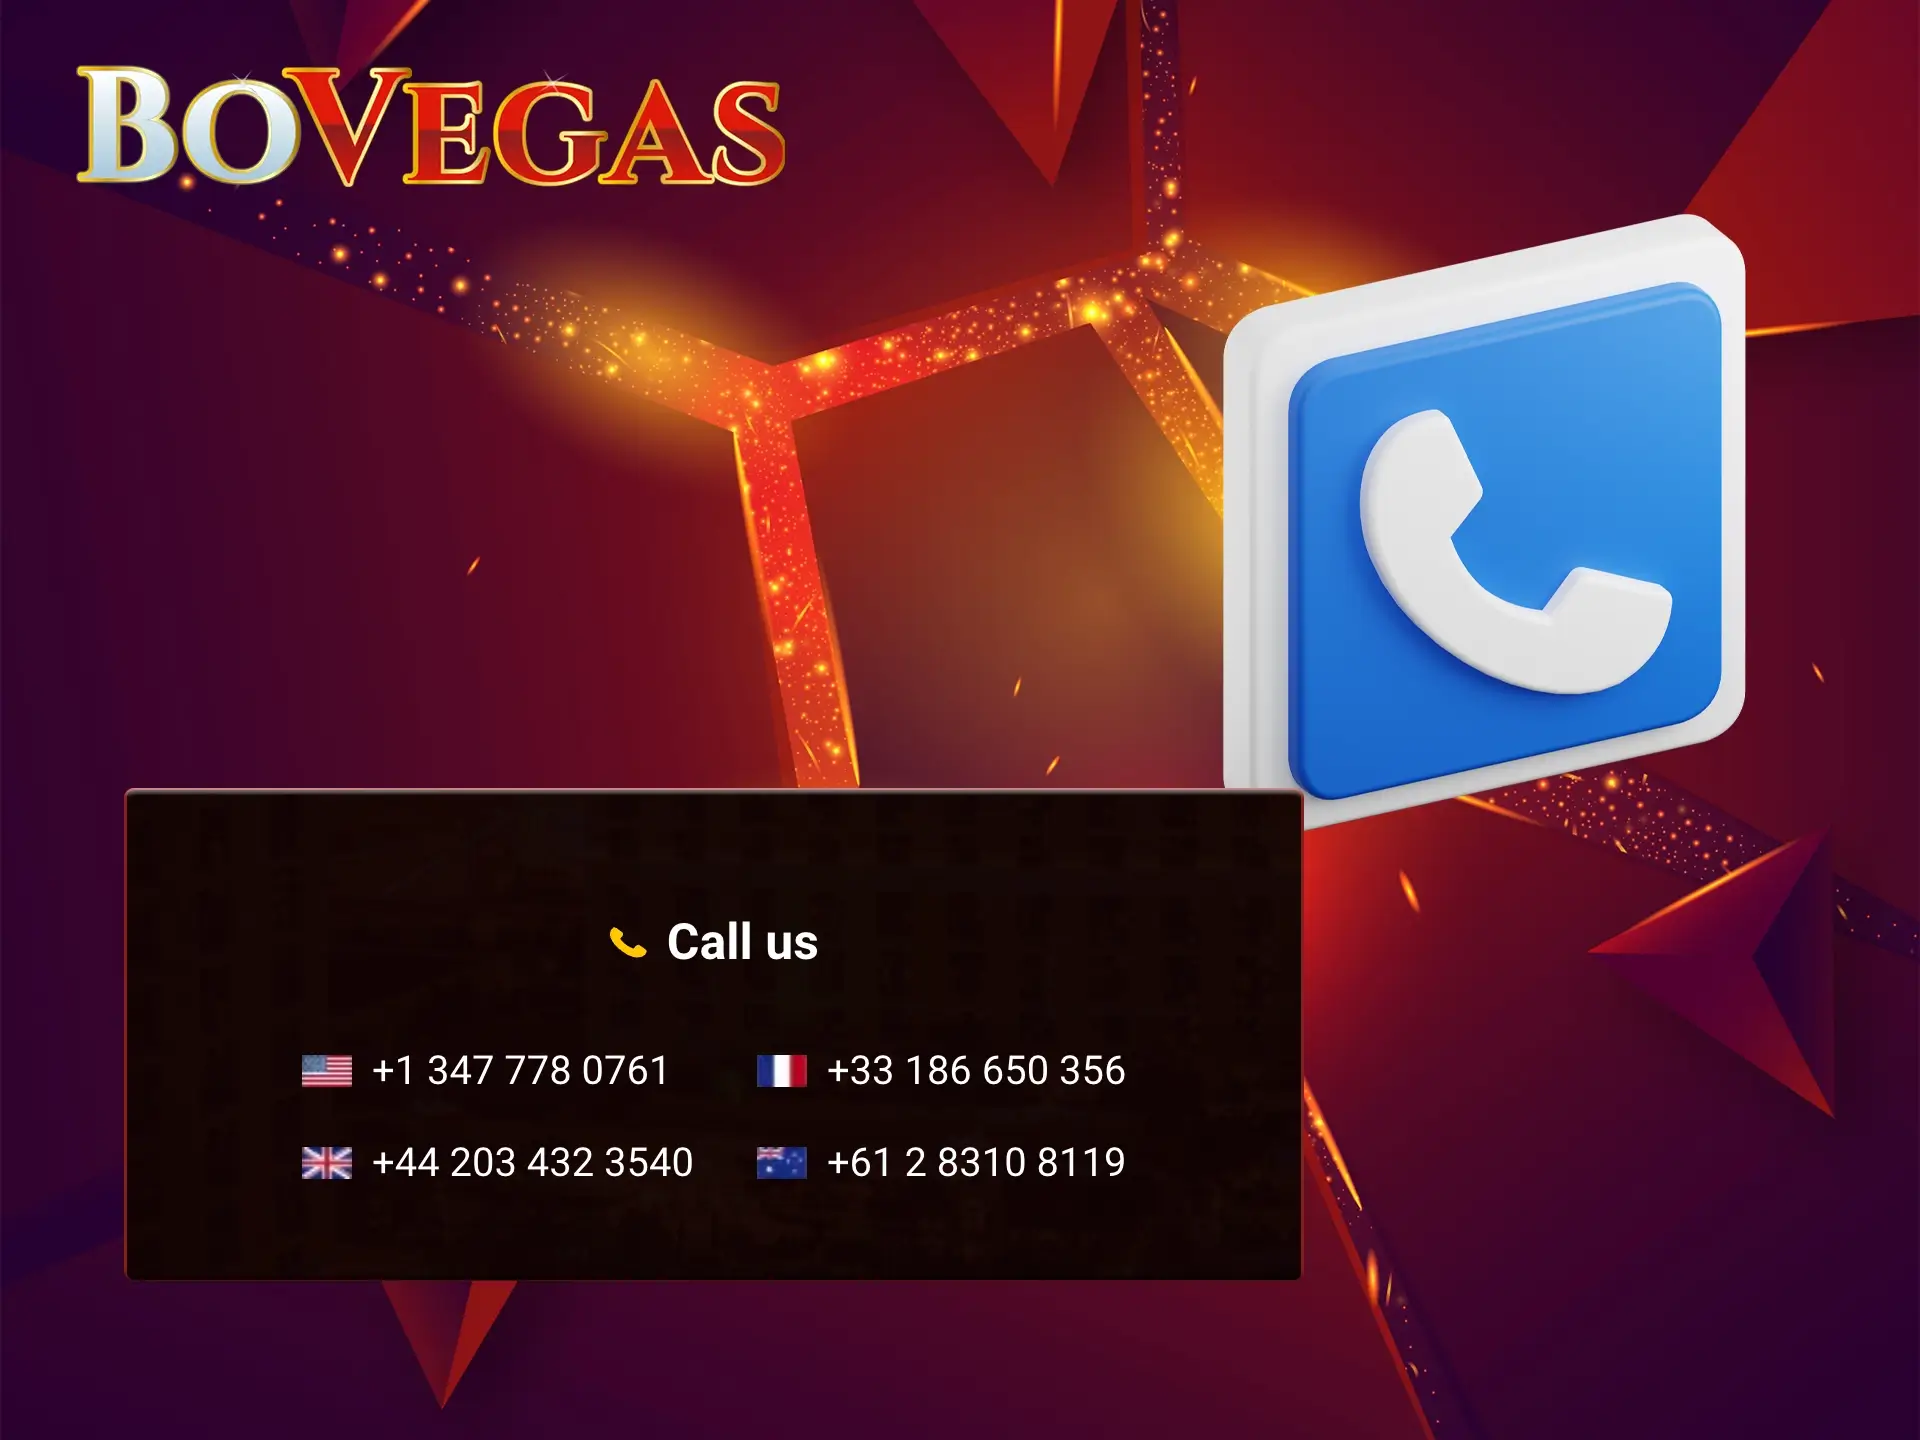 In cases where you prefer to speak to the BoVegas Casino support team over the phone, you can always call the number provided.